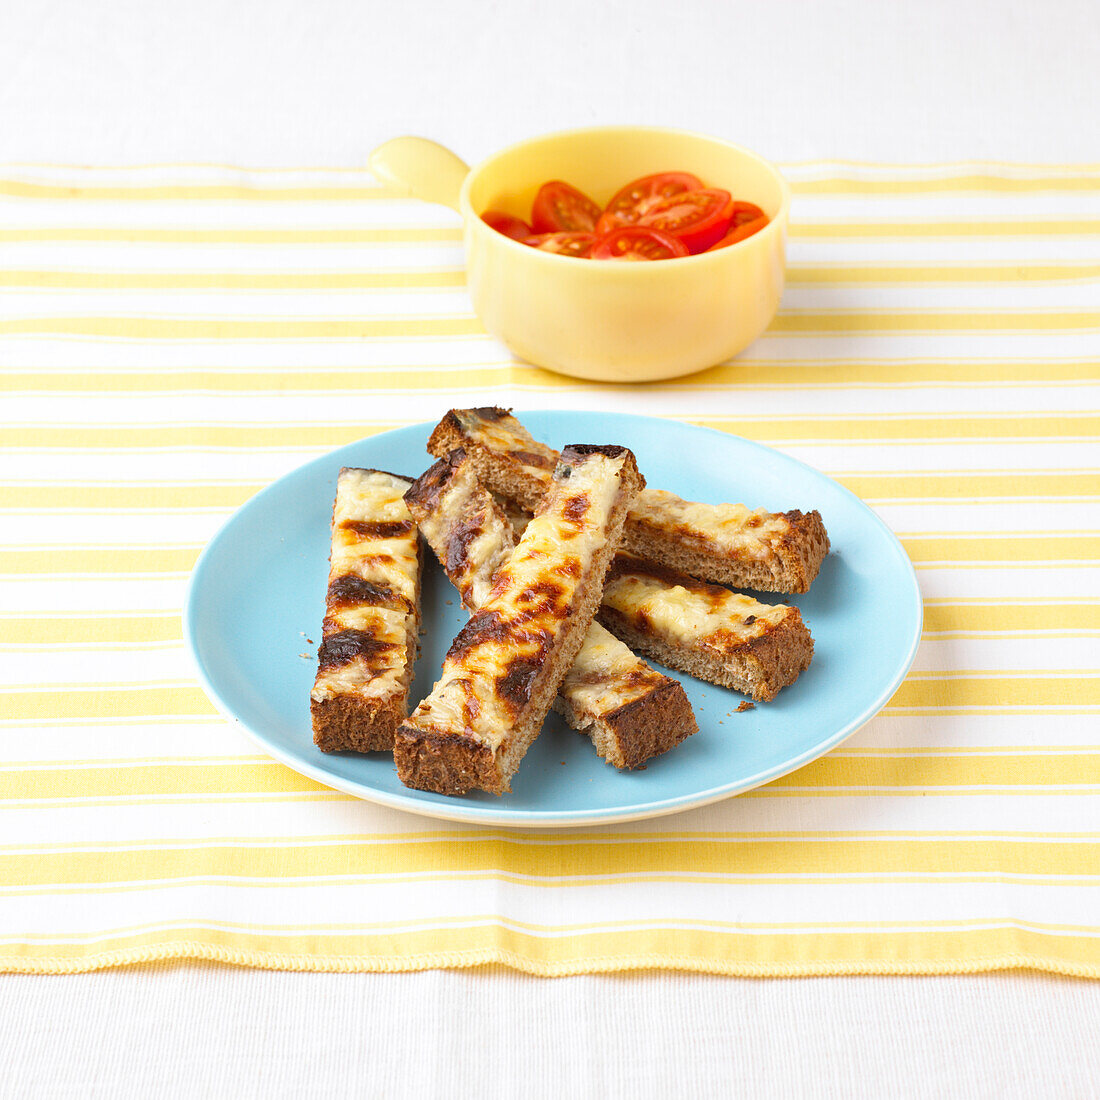 Toasted cheese toast fingers